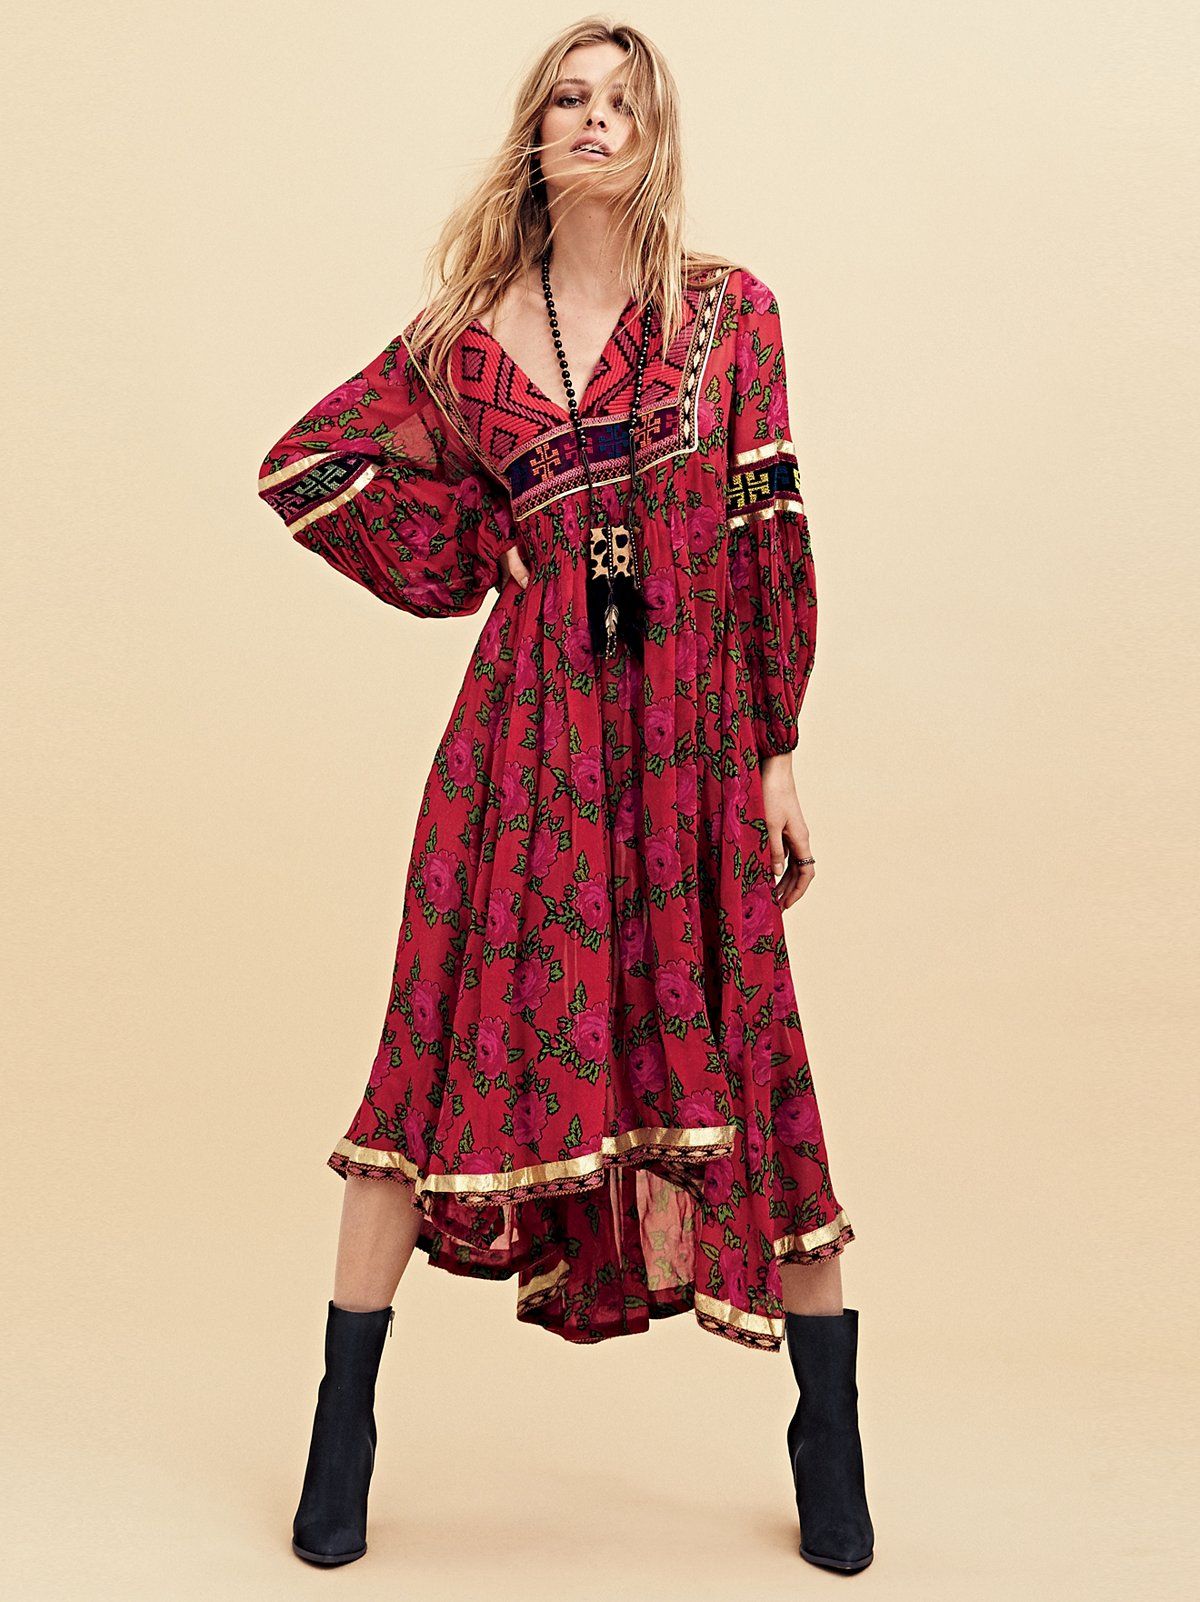 Bold Blooms Embroidered Dress | Free People